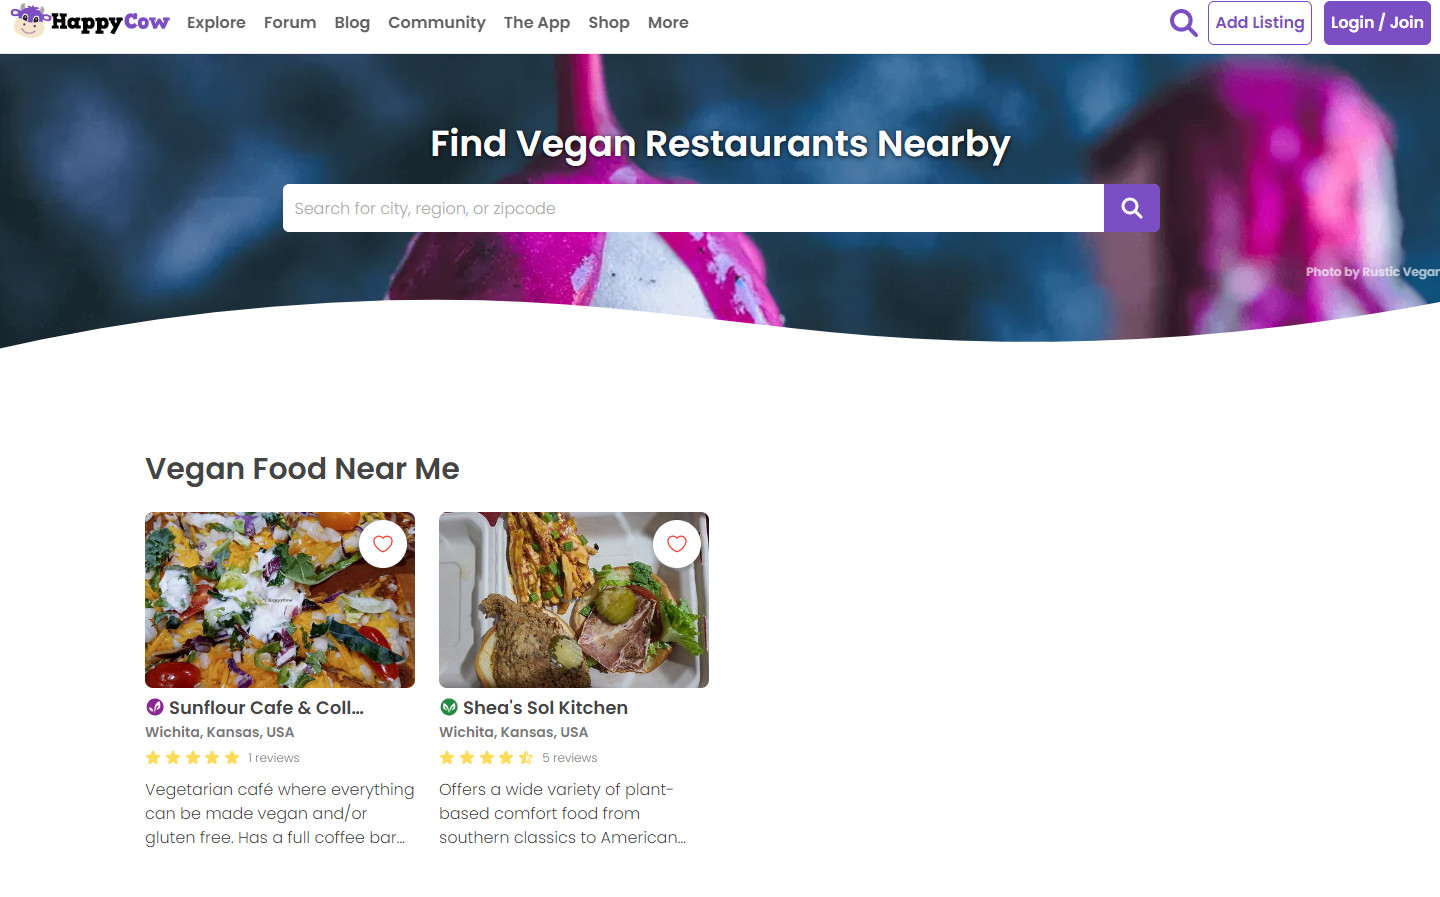 HappyCow is one of the most popular restaurant reviews sites for vegan and vegetarian cuisine